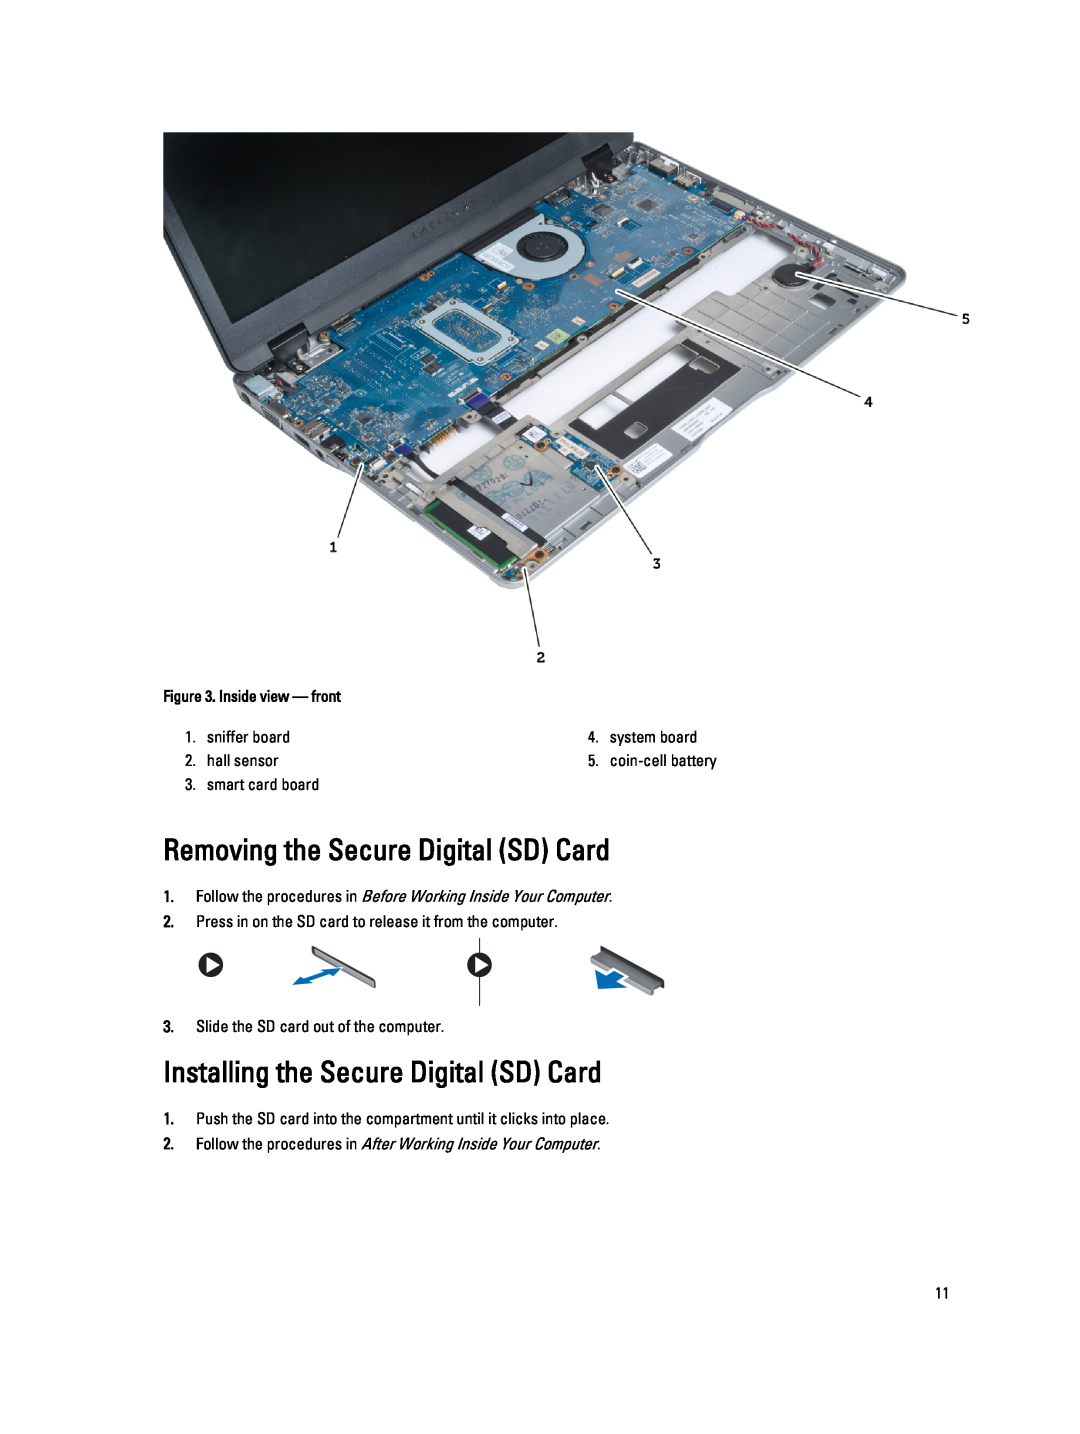 Dell 6430U owner manual Removing the Secure Digital SD Card, Installing the Secure Digital SD Card 